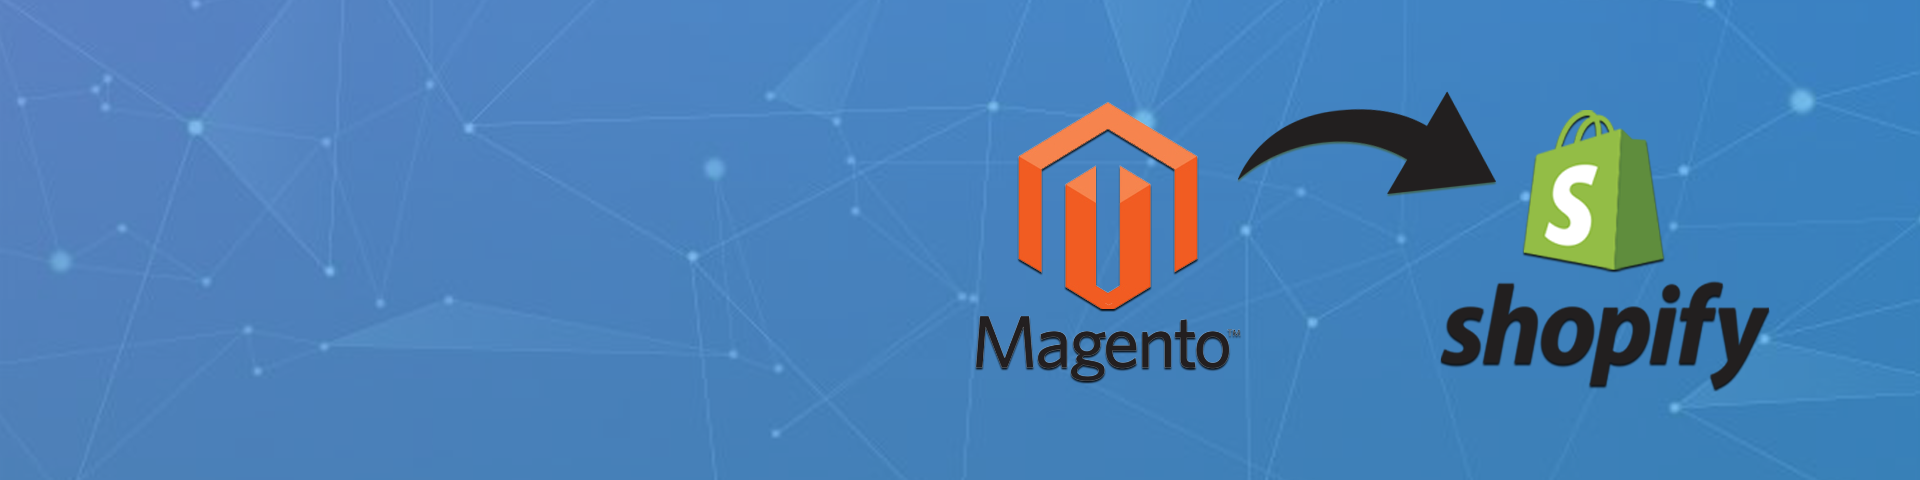 Smoothly-Migrate-Magento-to-Shopify-platform-banner